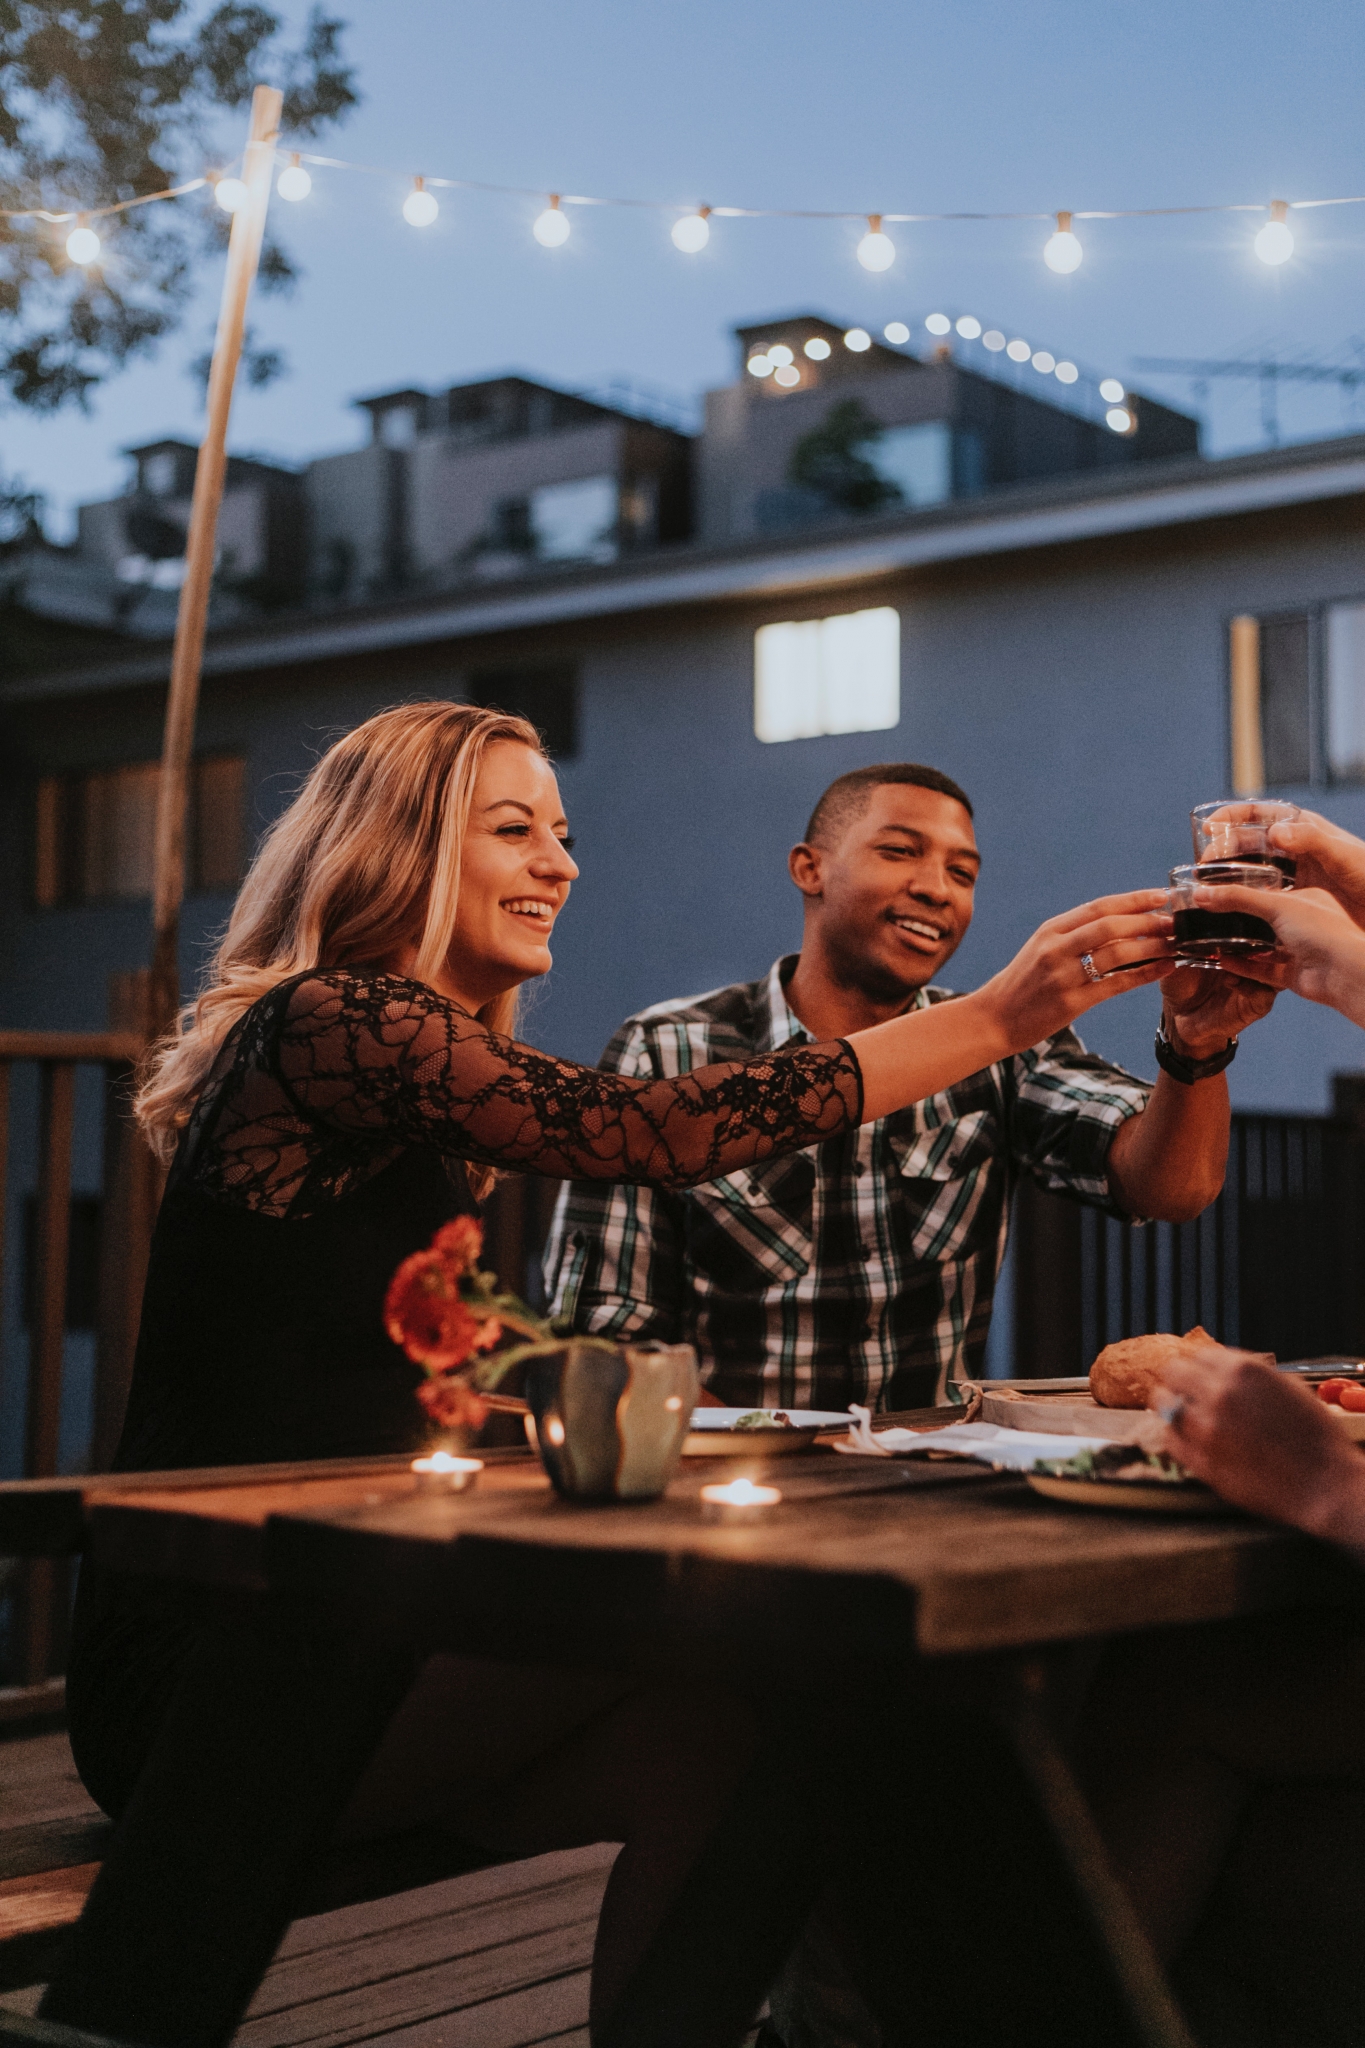 man and woman toasting drink with group of friends at outdoor wood table